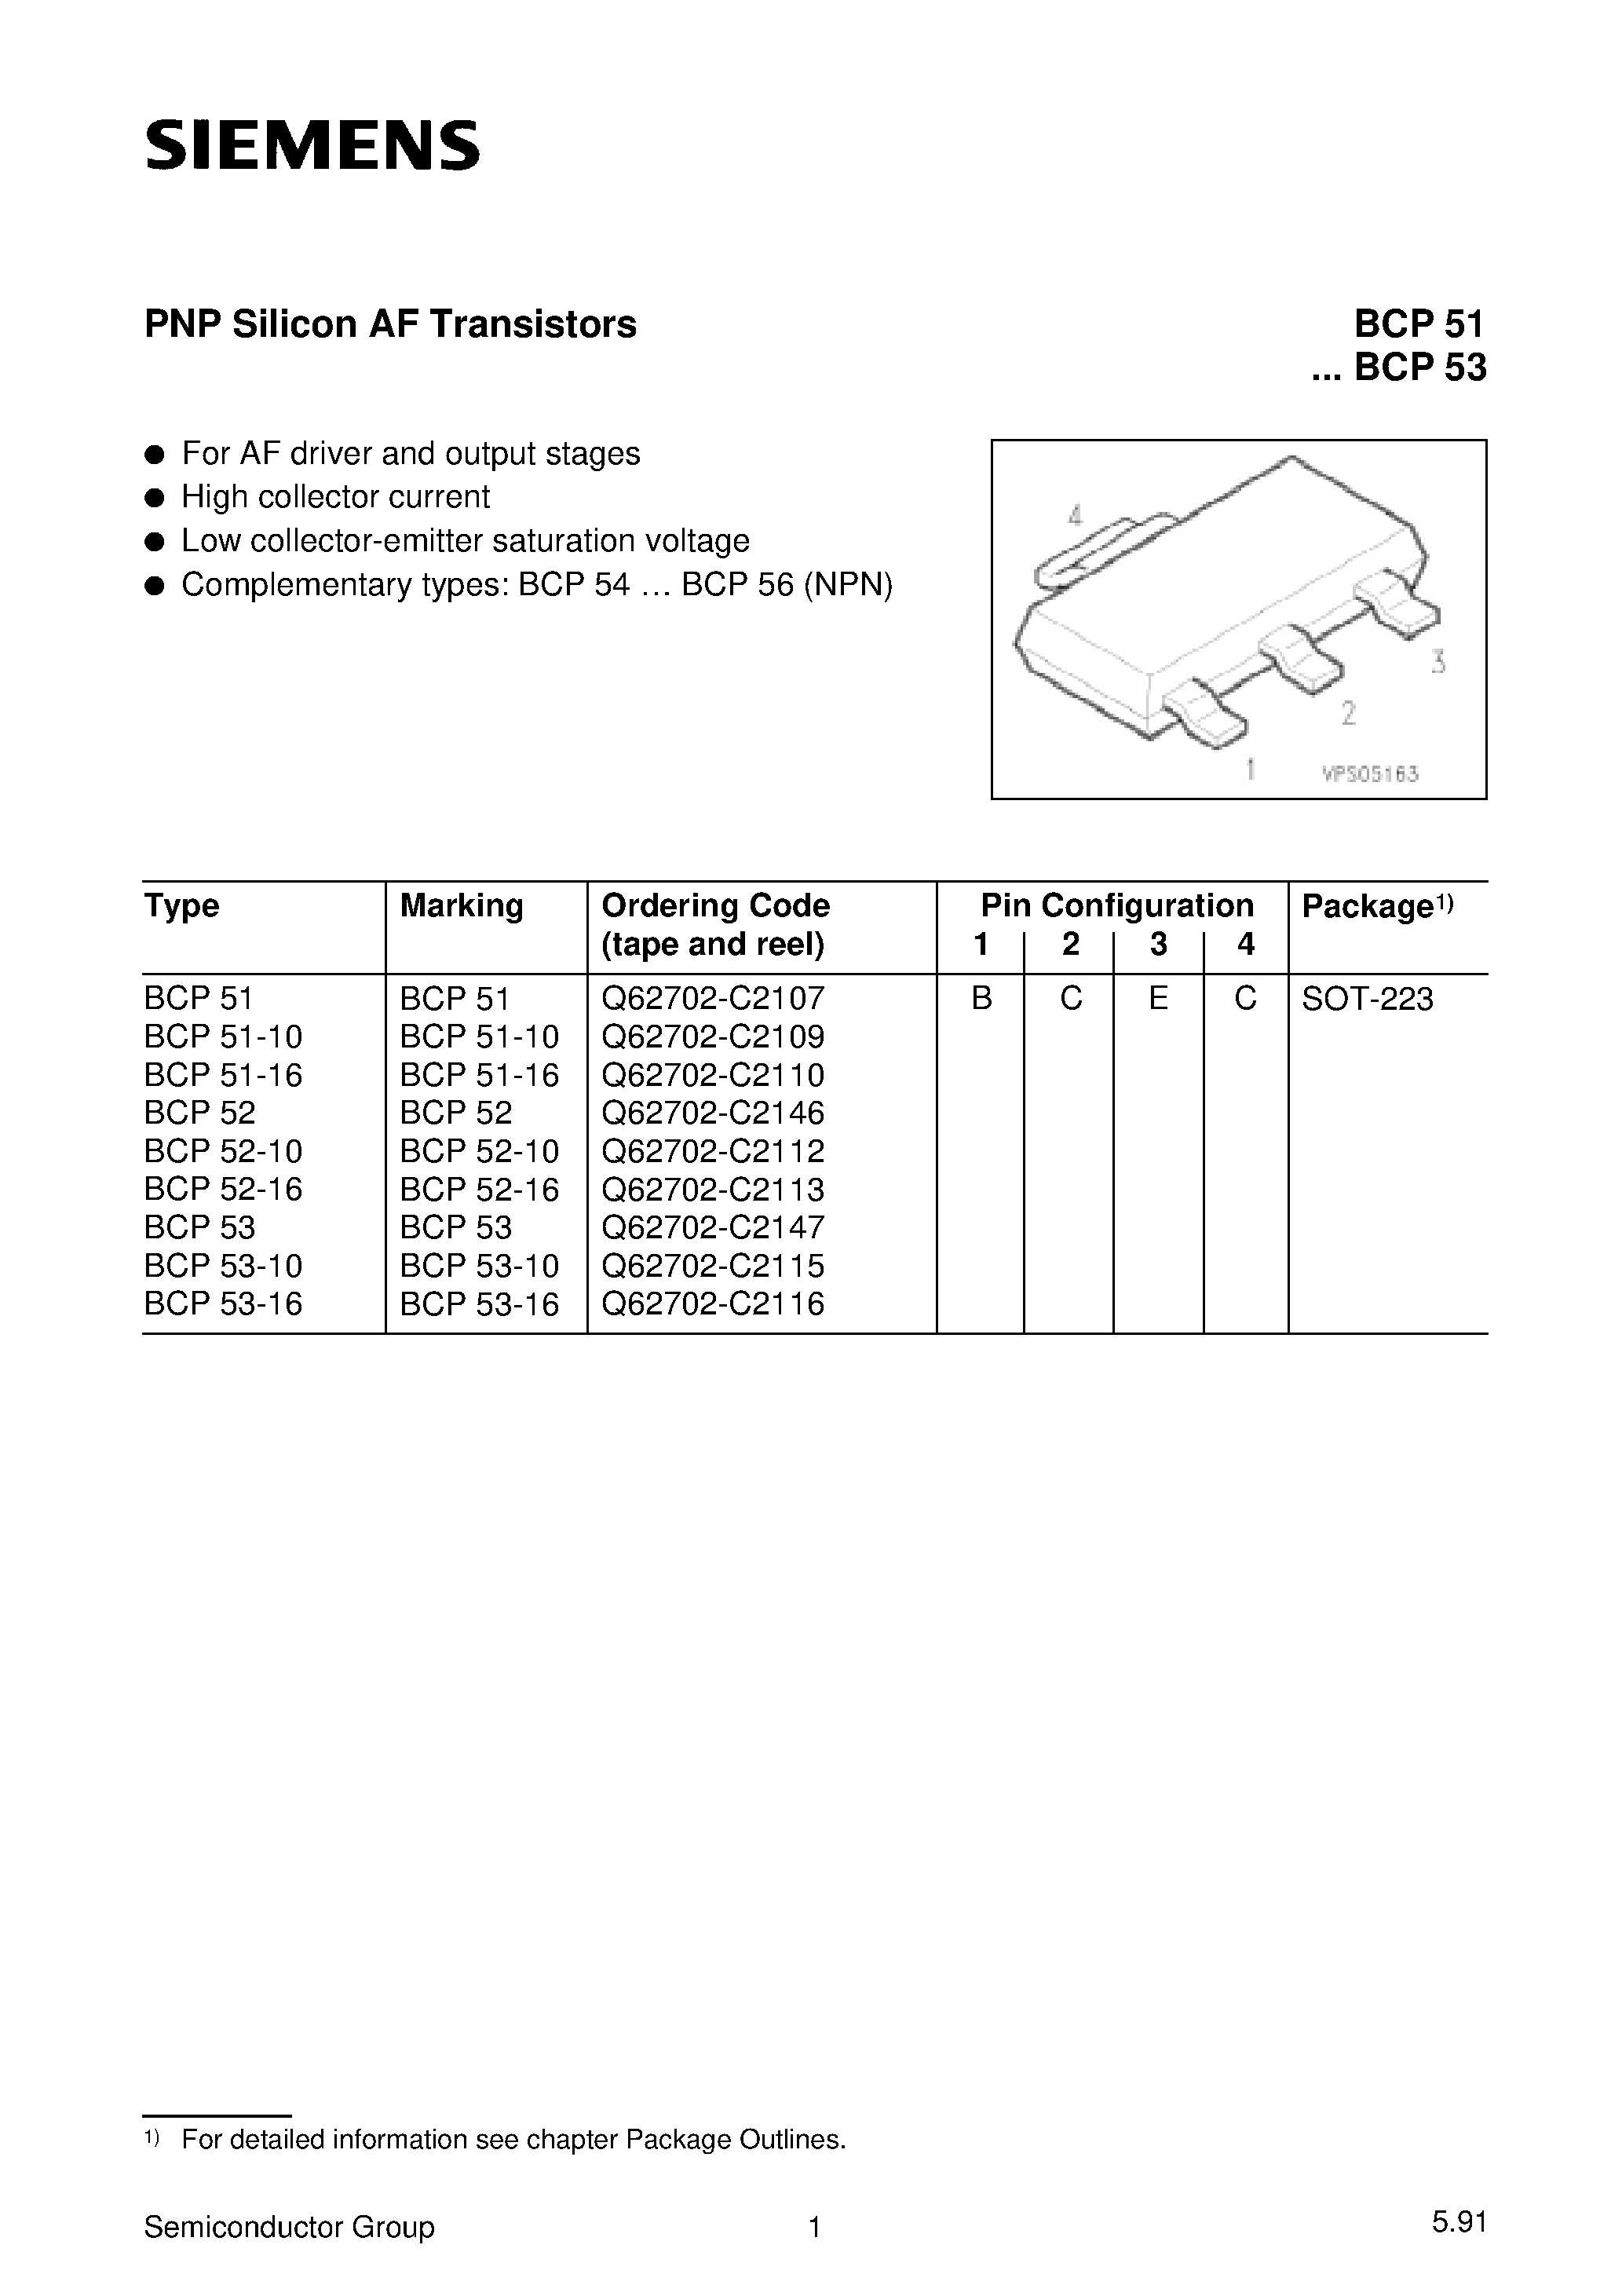 Datasheet BCP51-BCP53 - PNP Silicon AF Transistors (For AF driver and output stages High collector current) page 1